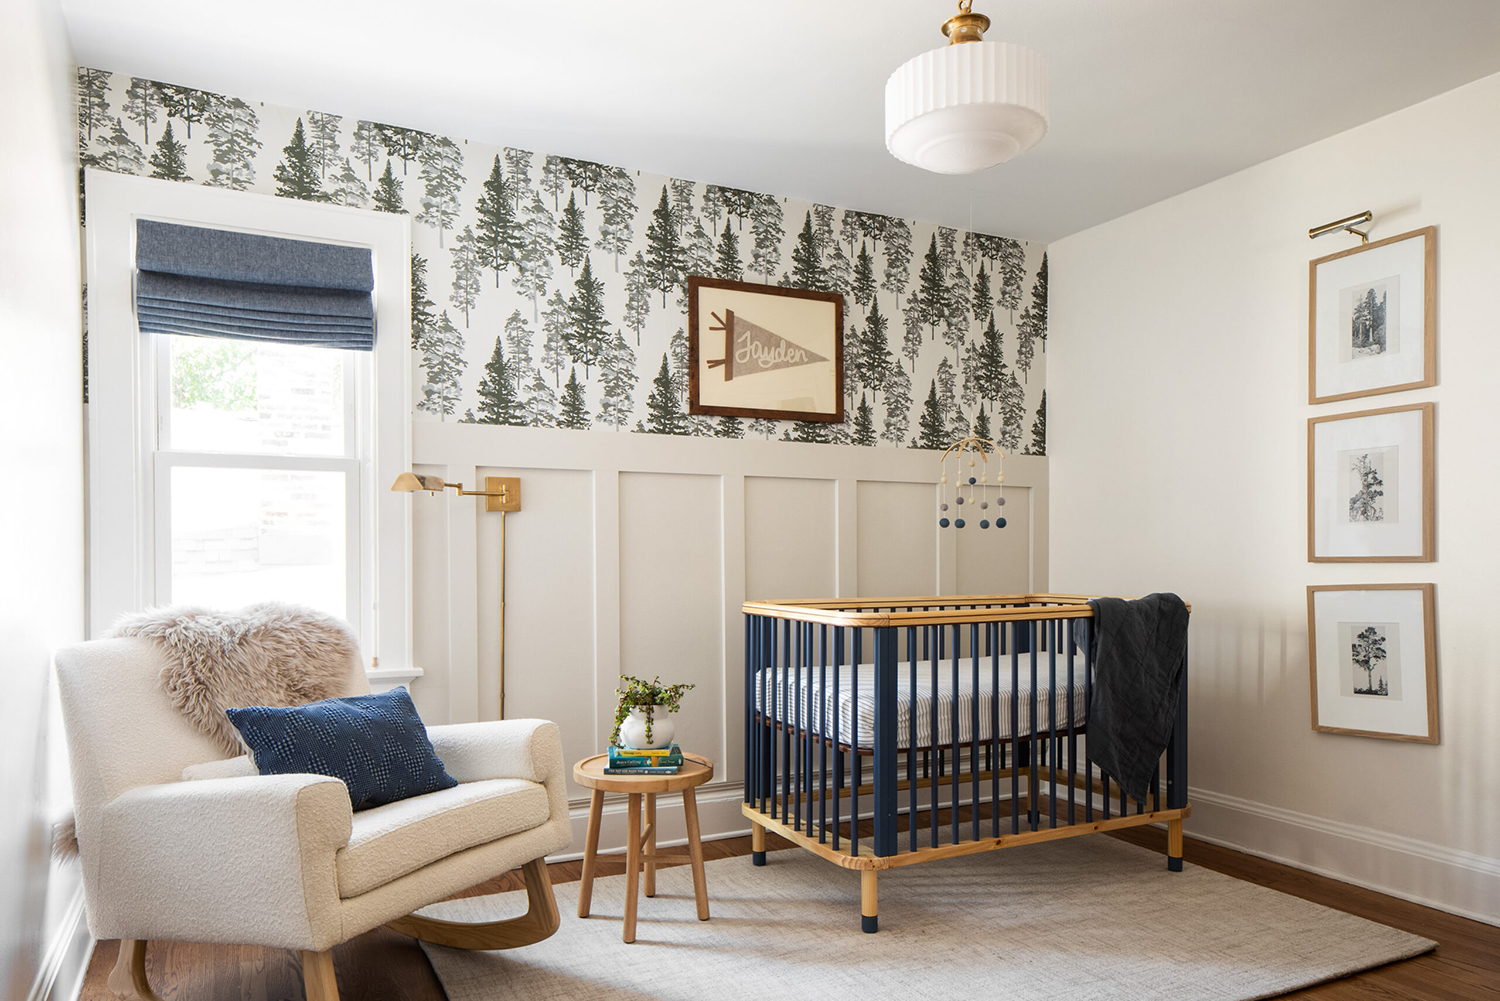 gender-neutral nursery that's rustic and refined with evergreen tree wallpaper